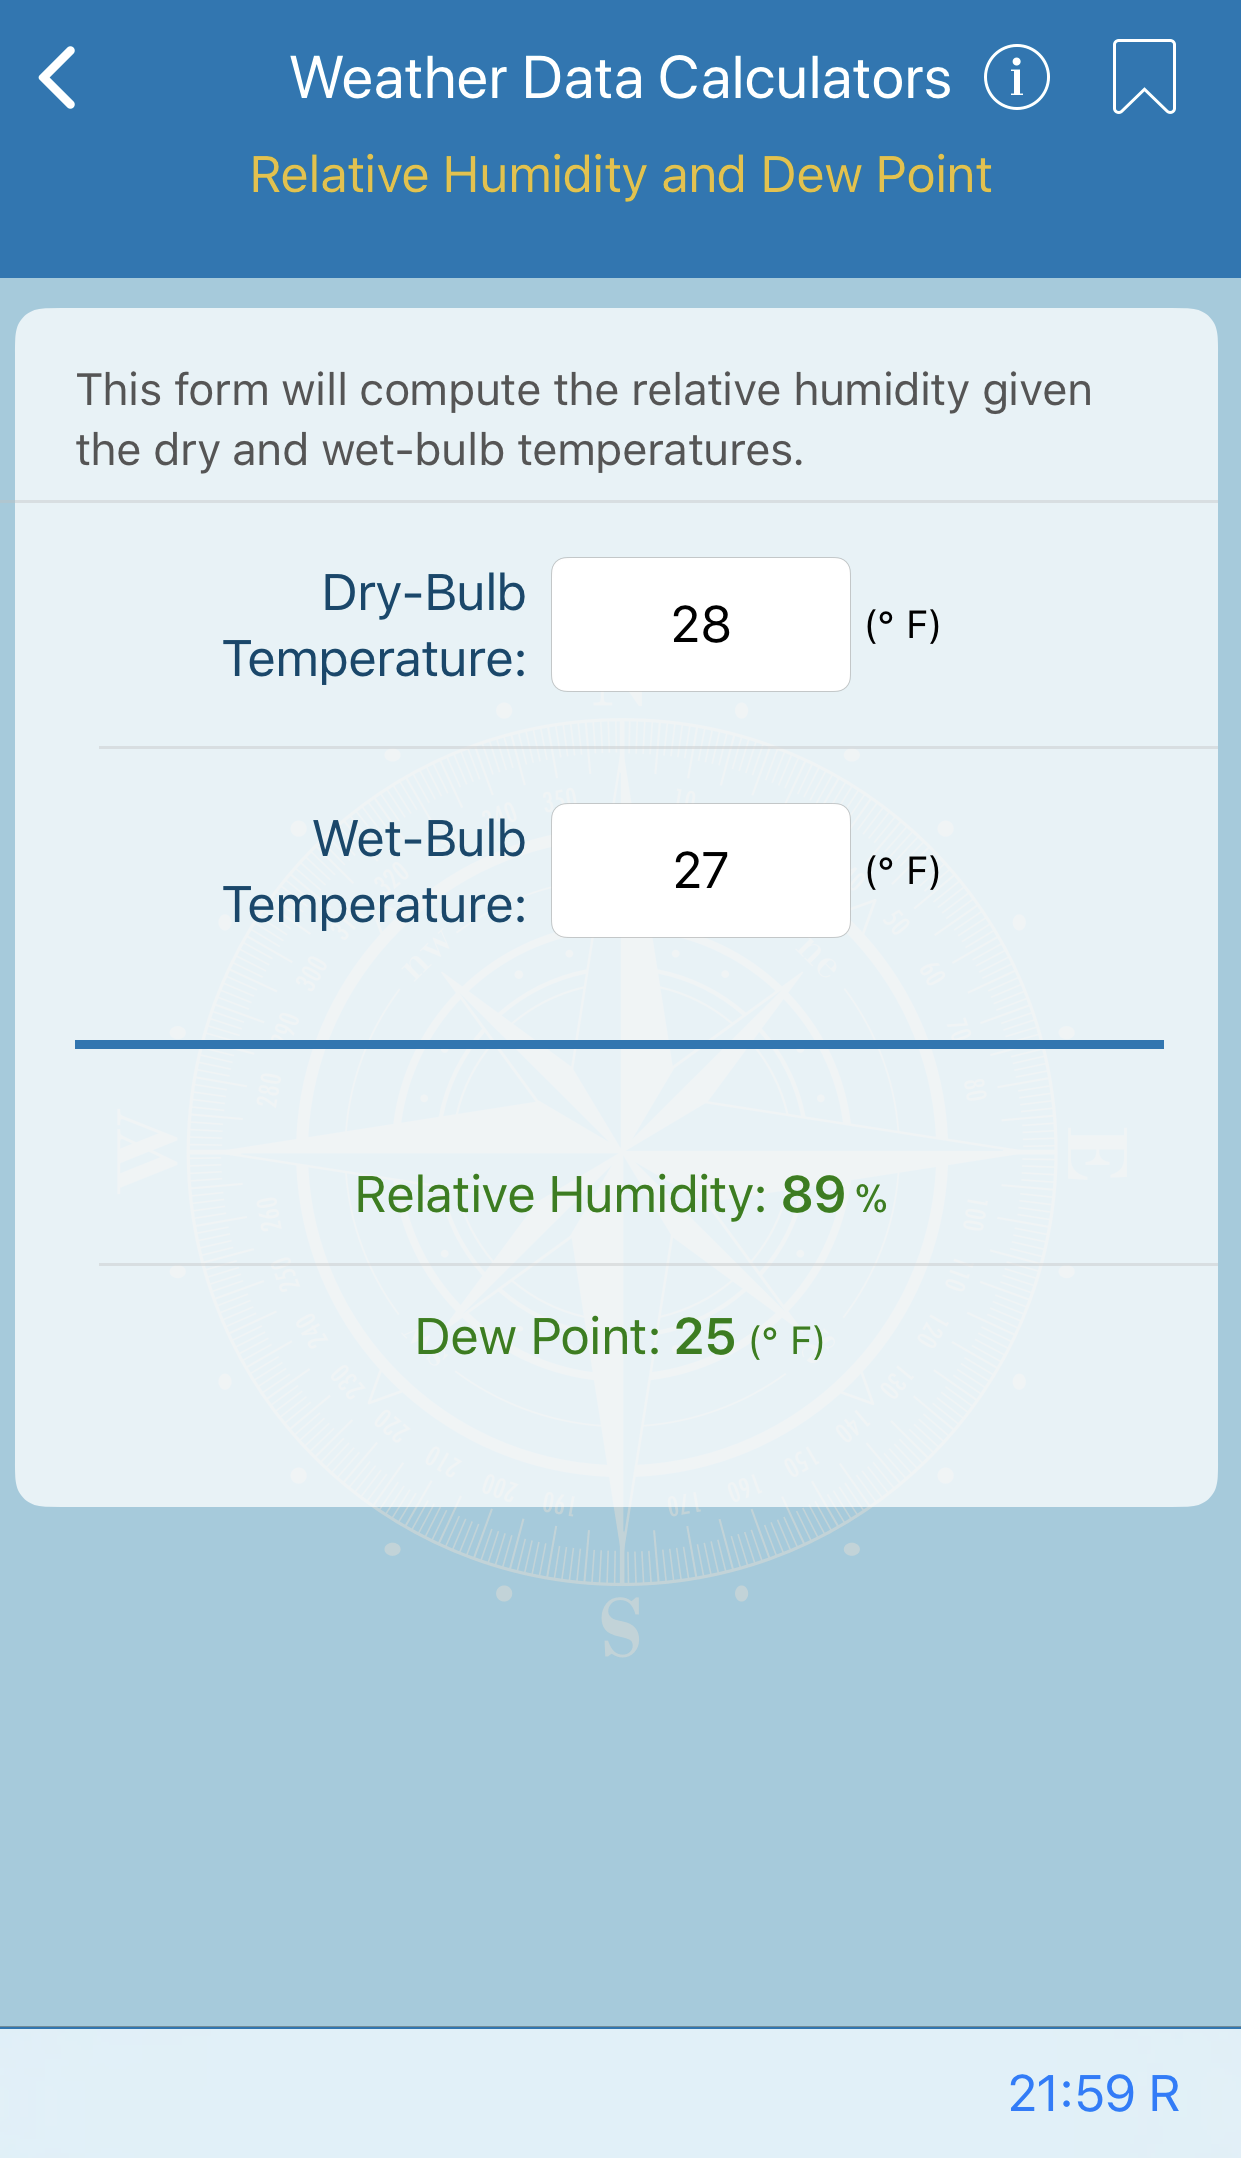 Relative Humidity and Dew Point